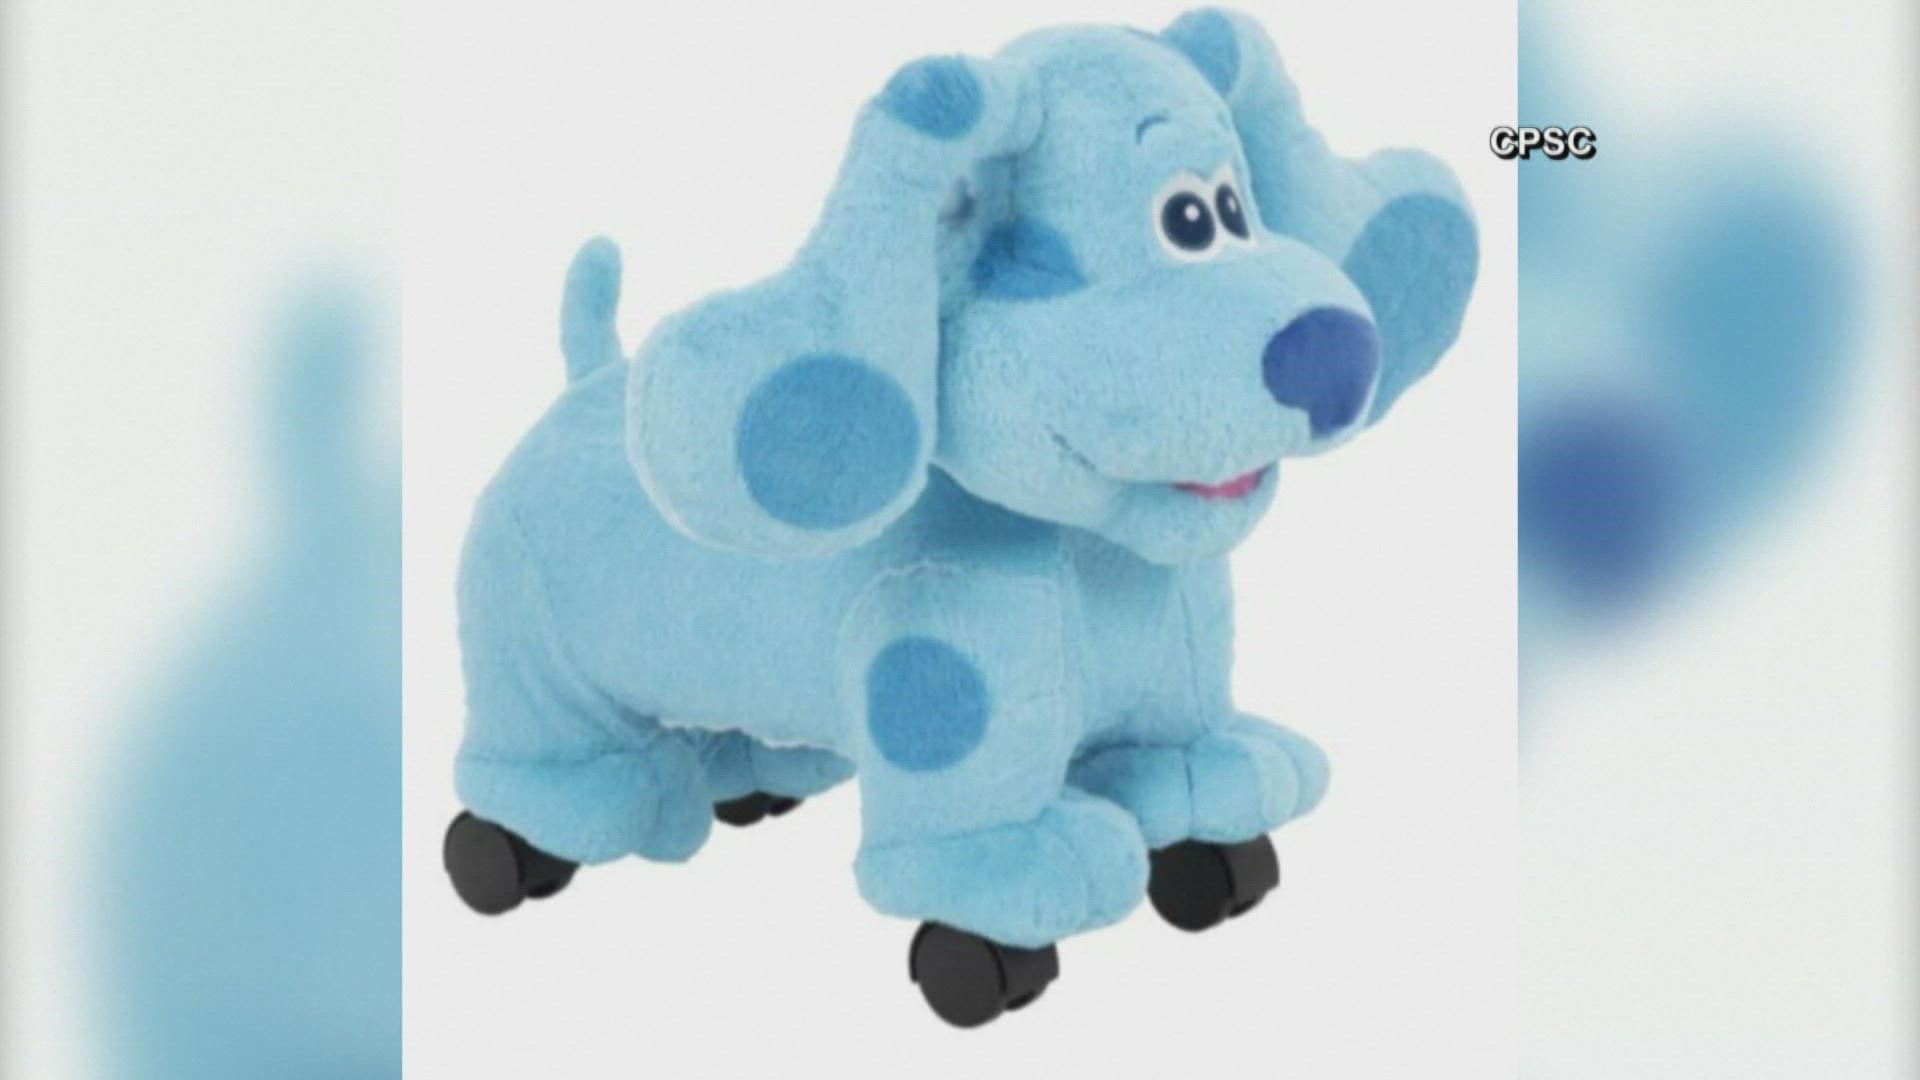 Huffy is recalling several "Blue's Clues" toys because they could cause children to fall and hurt themselves.